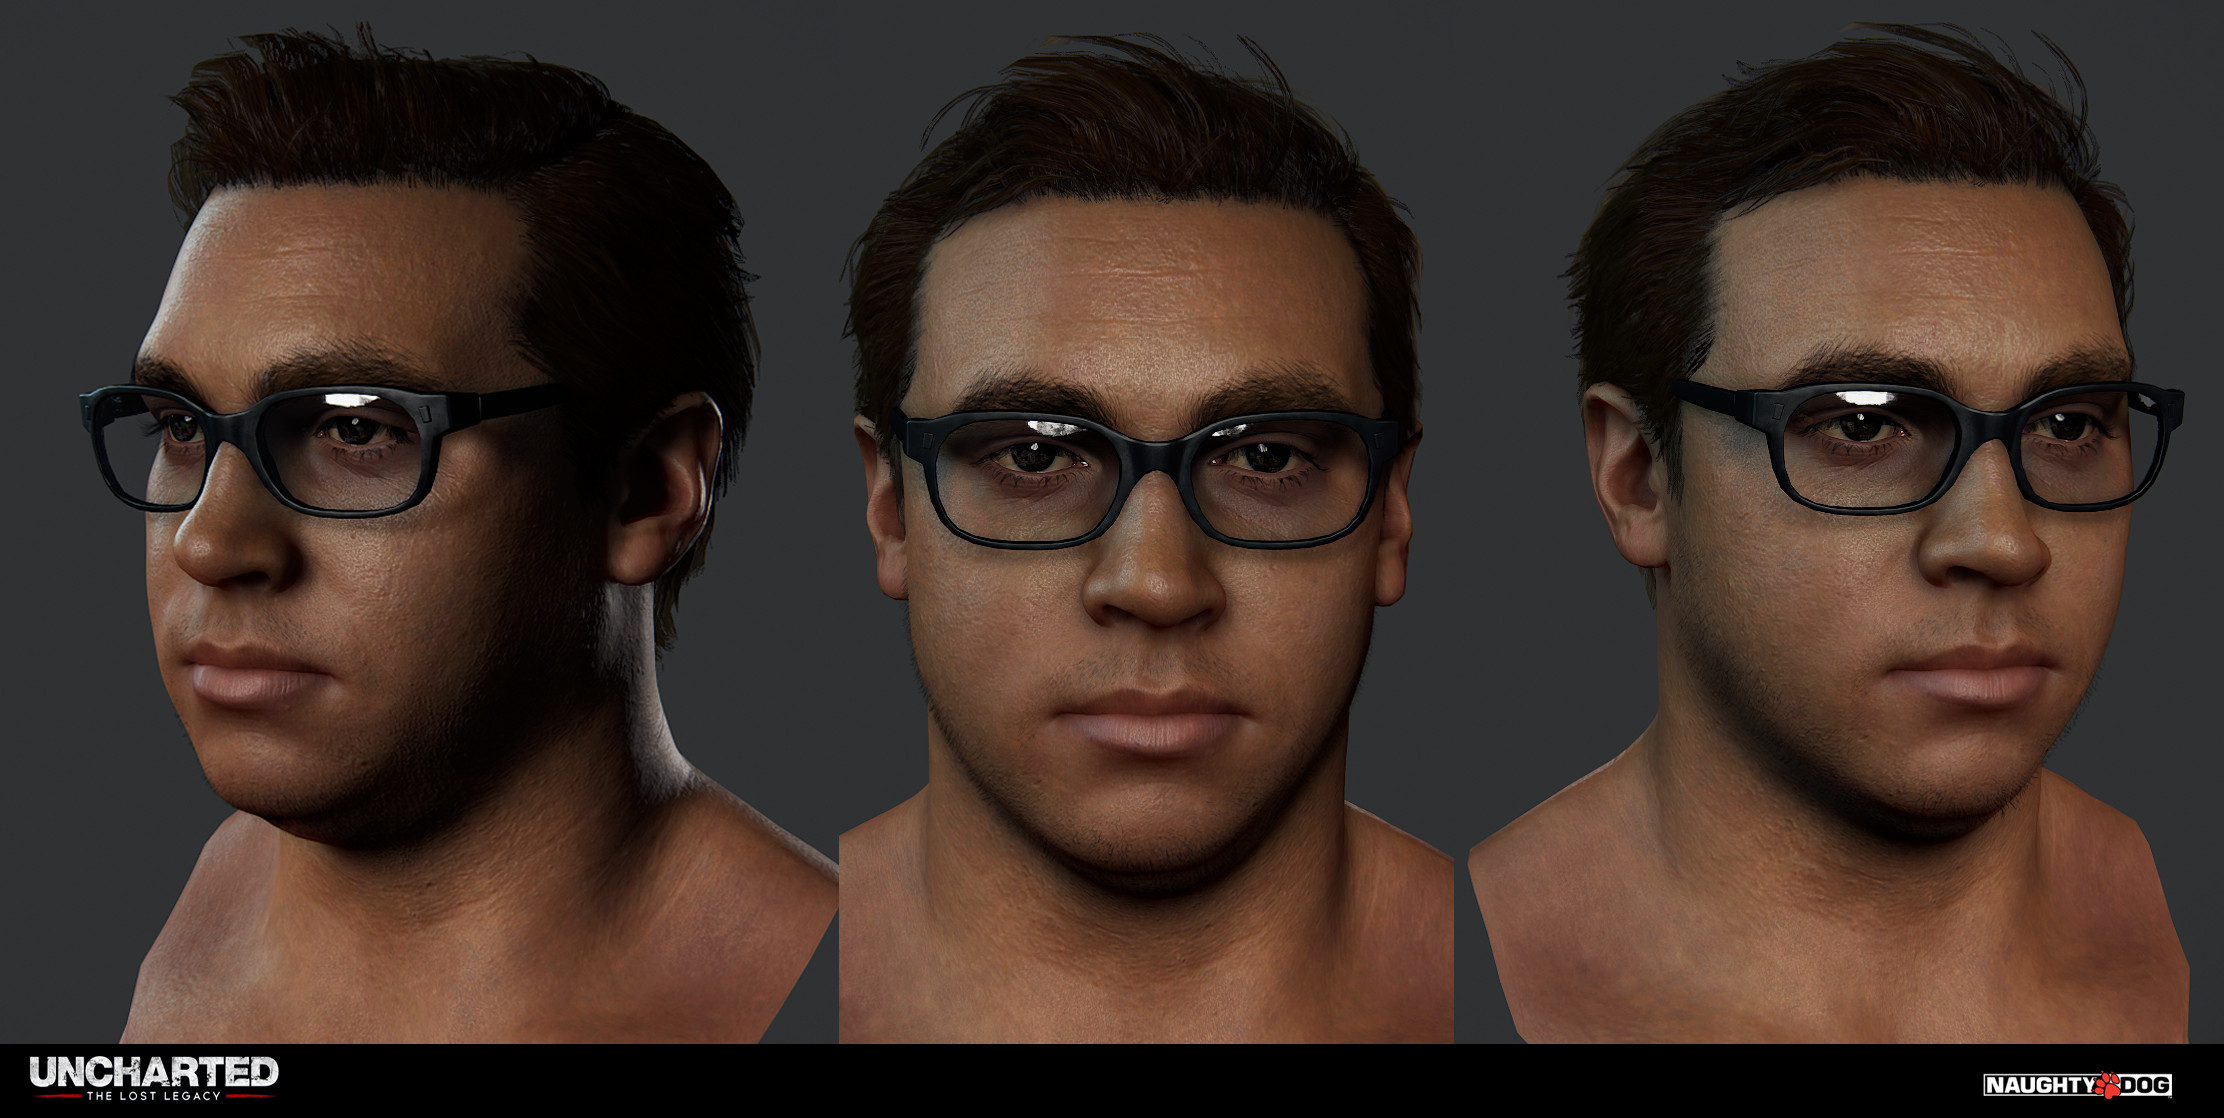 NPC head: head started from scan data. Hair started from an existent archive and reworked for this character.